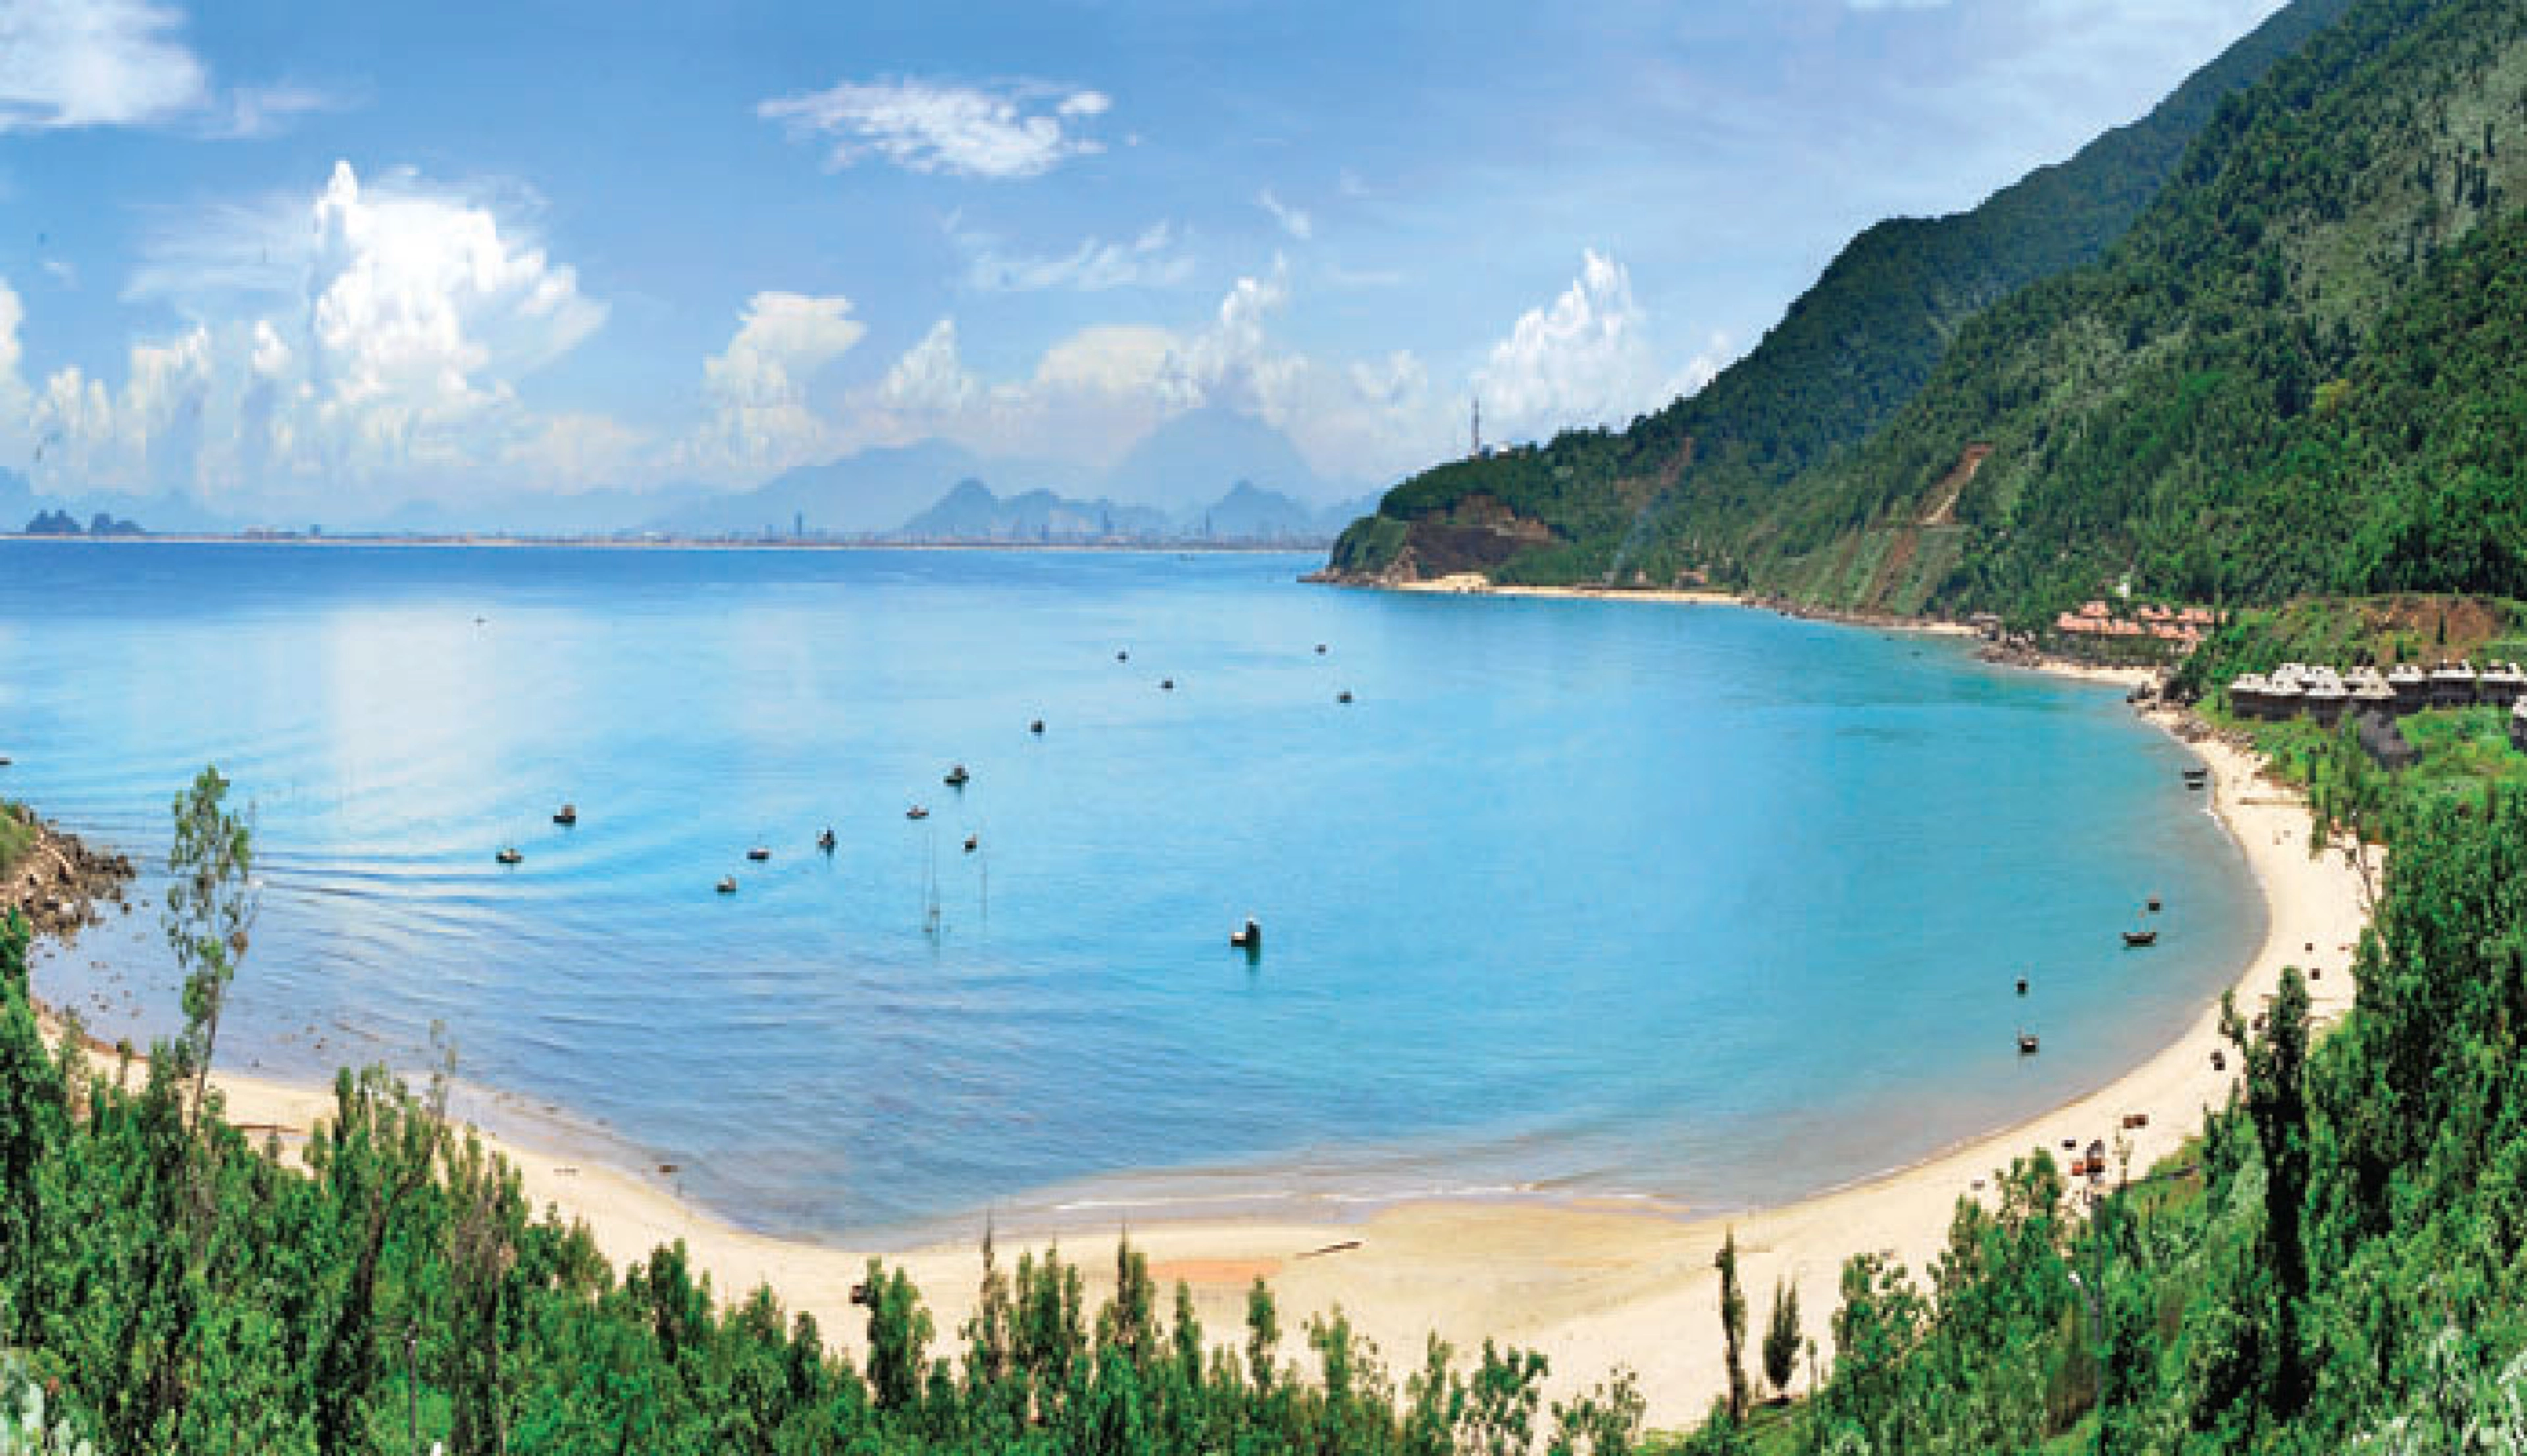 Non Nuoc Beach - One of the 6 most beautiful beaches on the planet